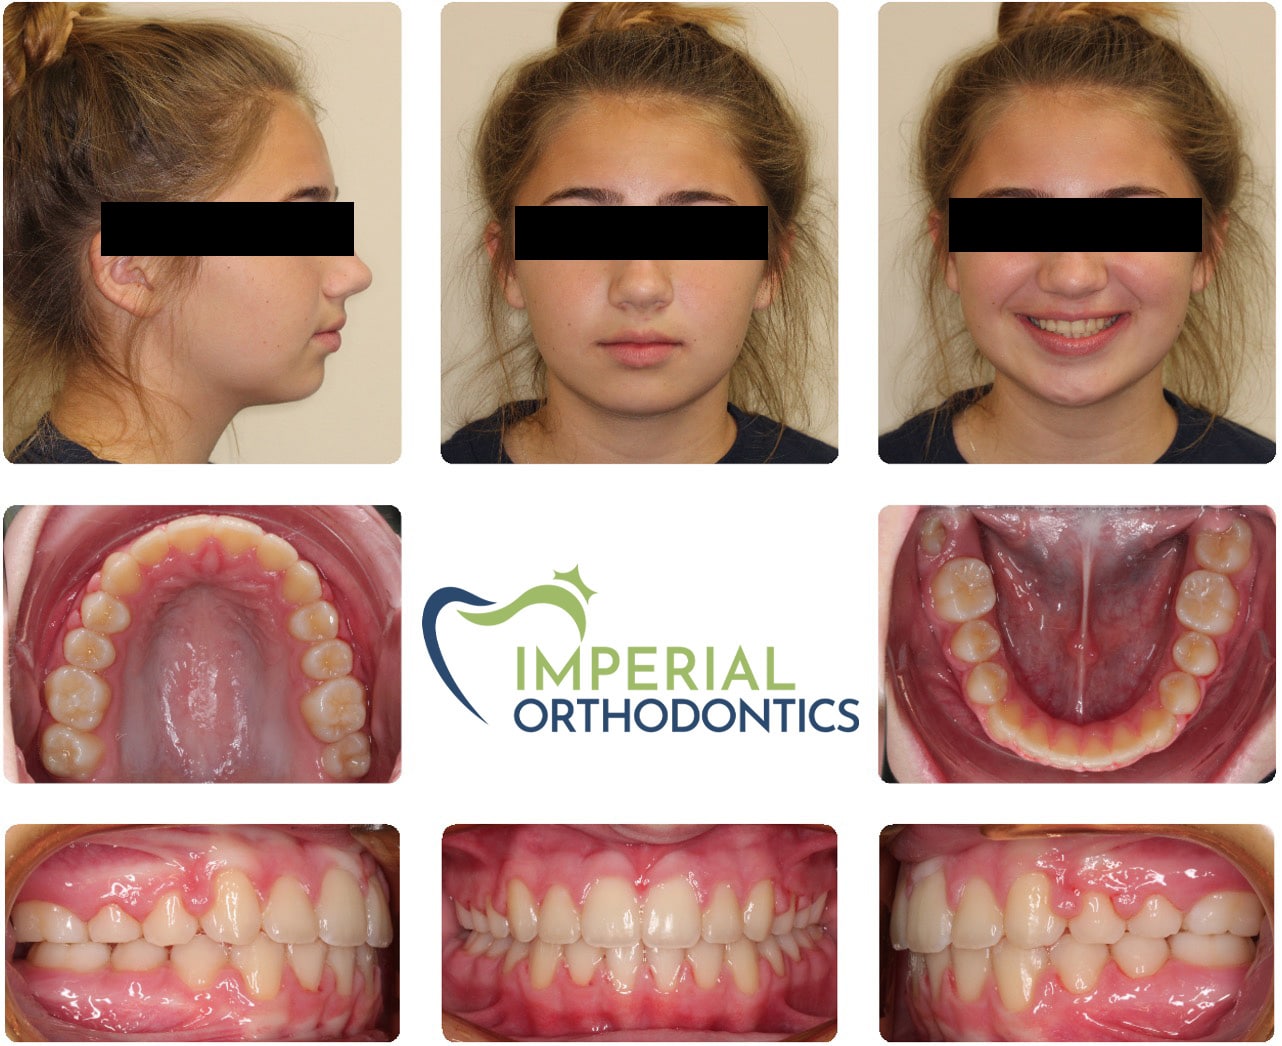 Before and after Imperial Orthodontics in Sugar Land, TX